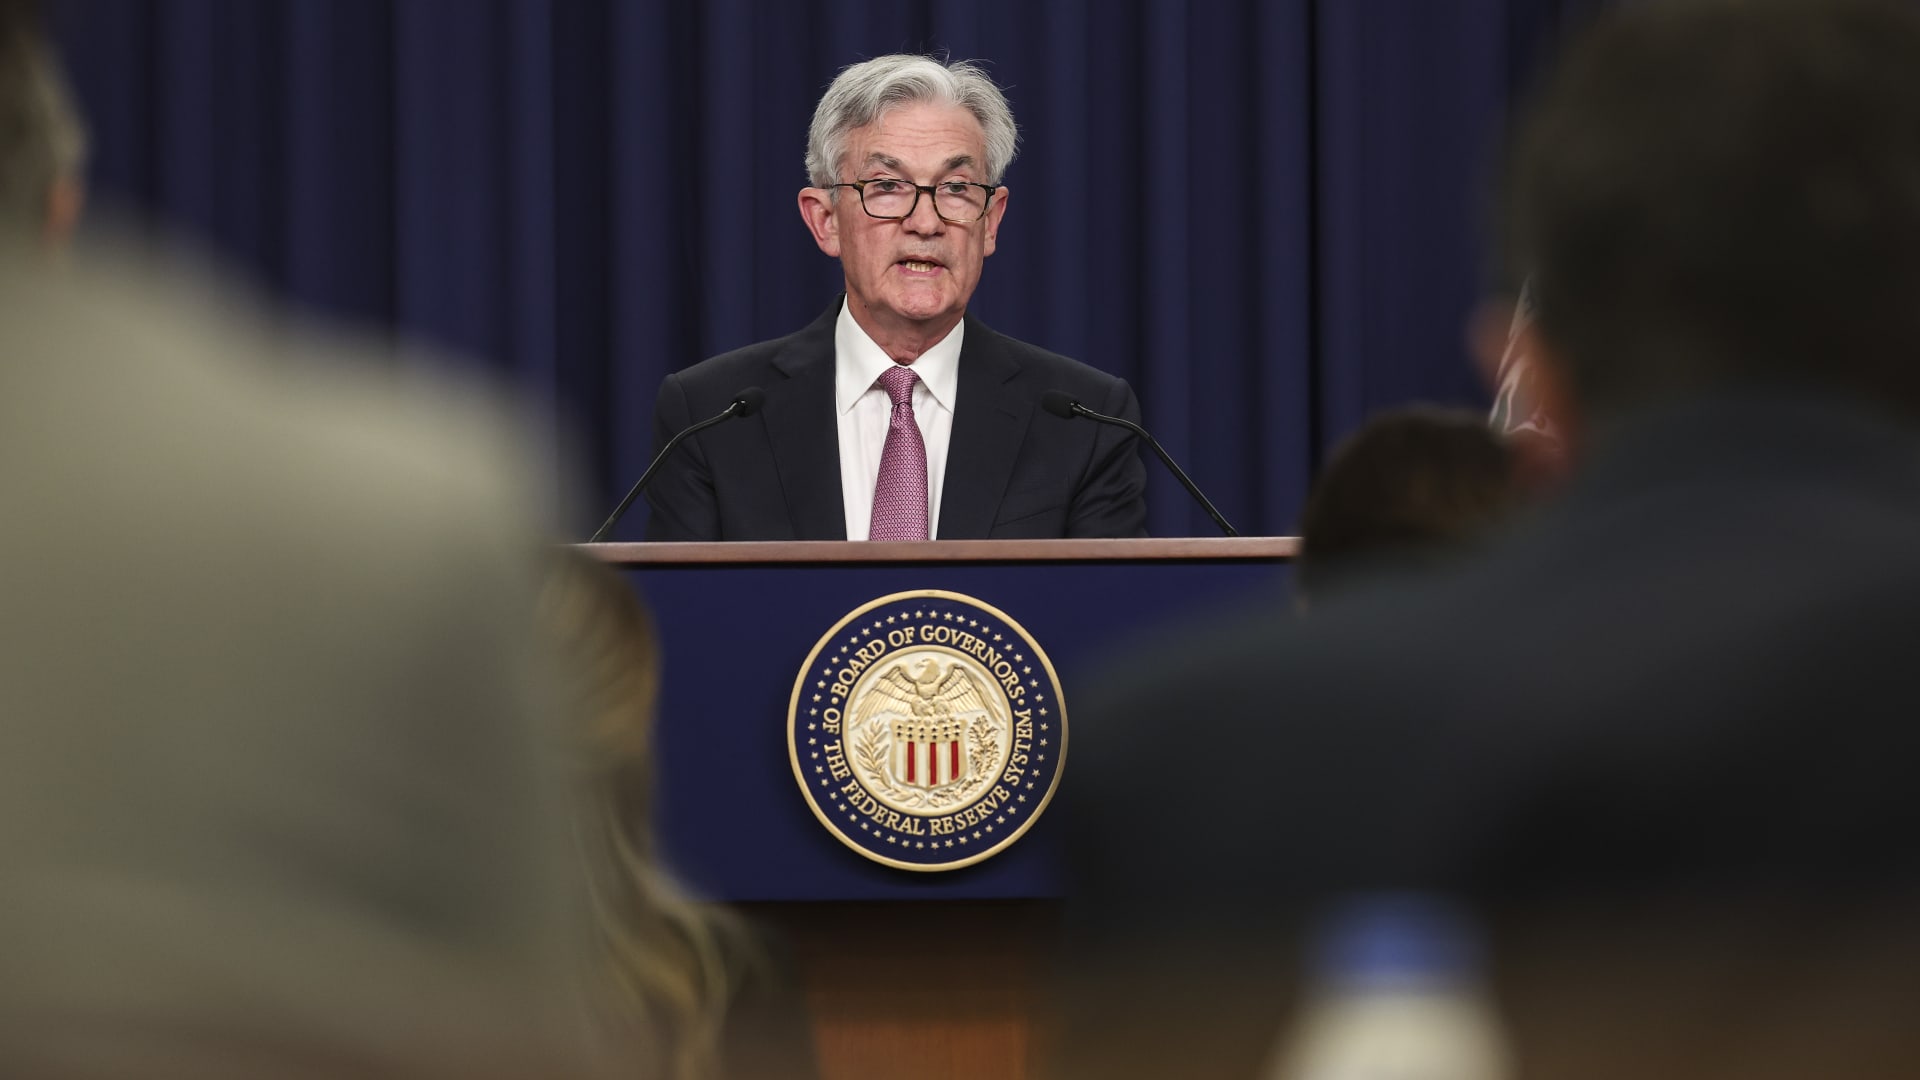 Real-time updates of the Fed’s big rate decision and Powell’s press conference